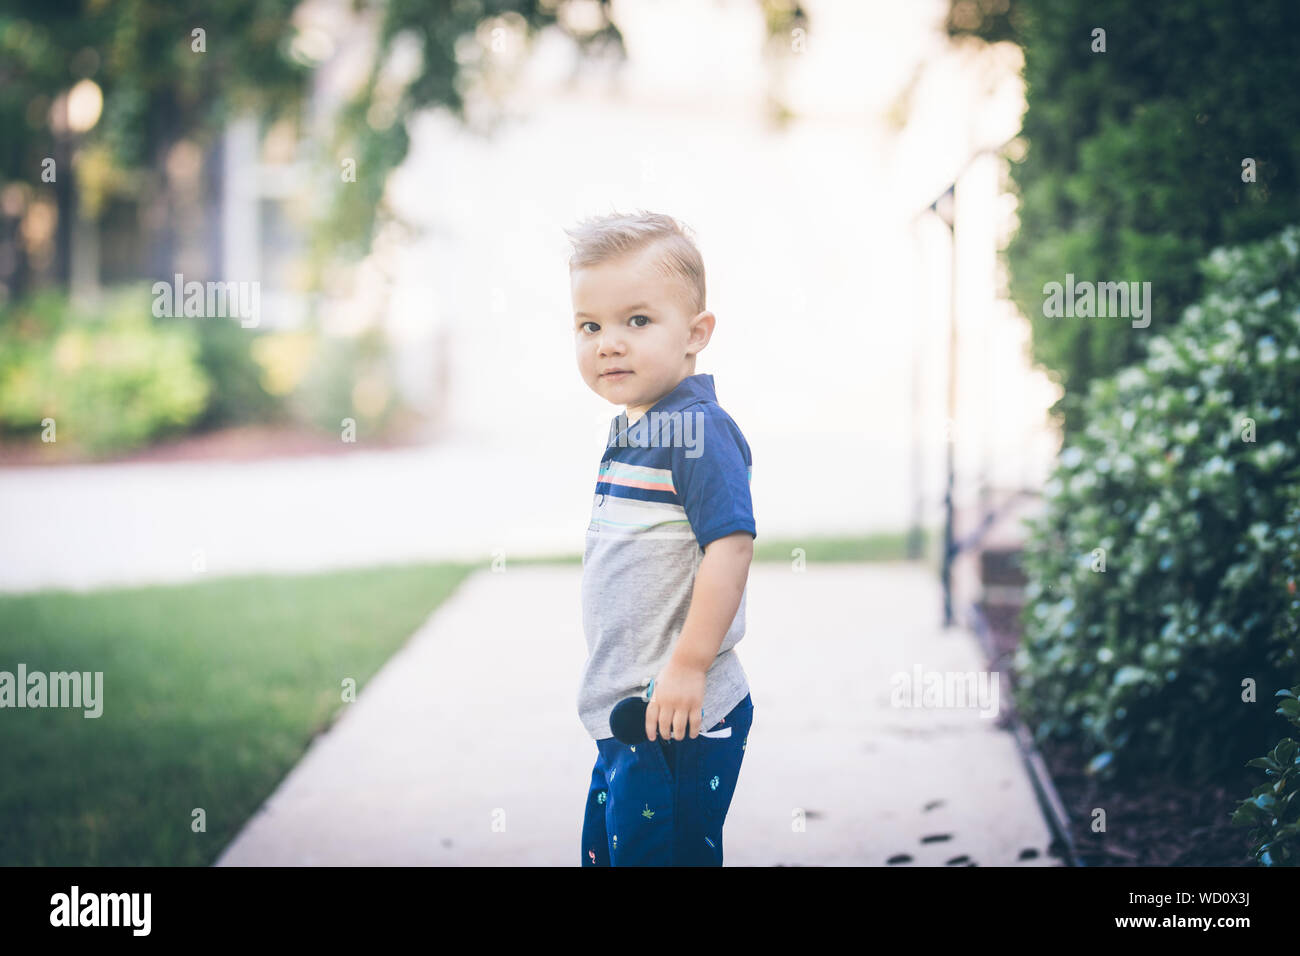 Little boy looking at camera over his shoulder outdoors Stock Photo